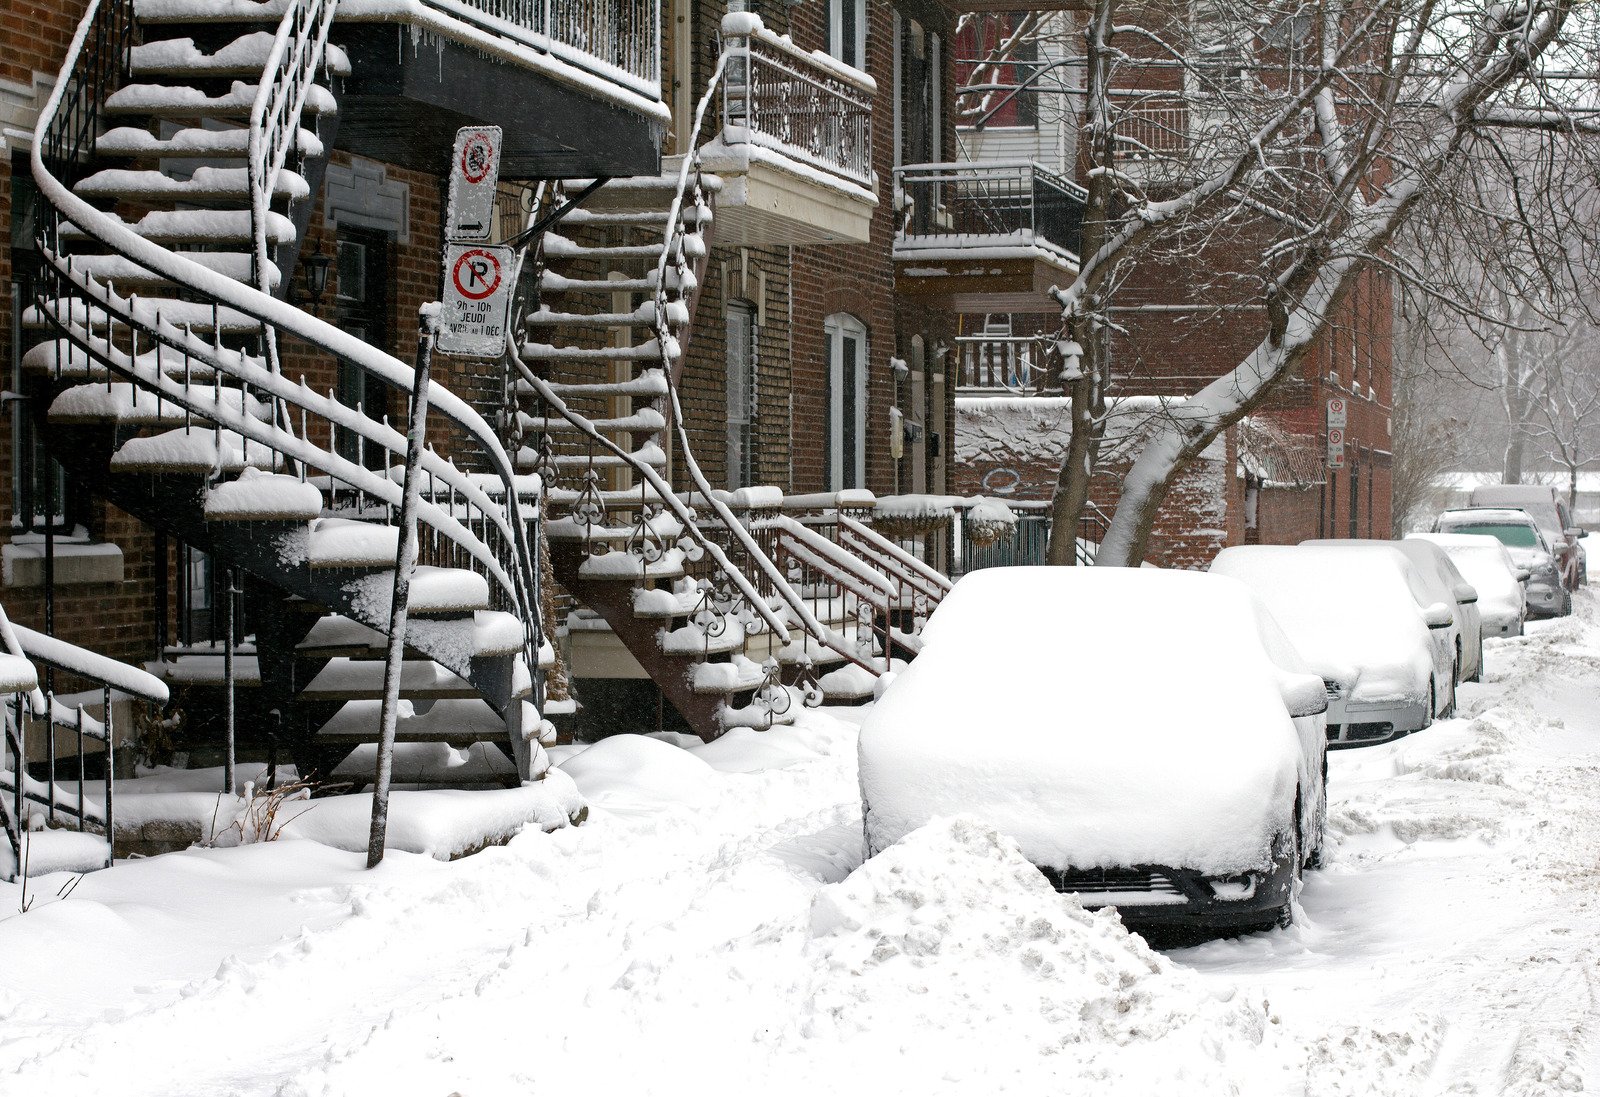 Recent Winter Storms Highlight Need to Plan for All Contingencies in an Emergency